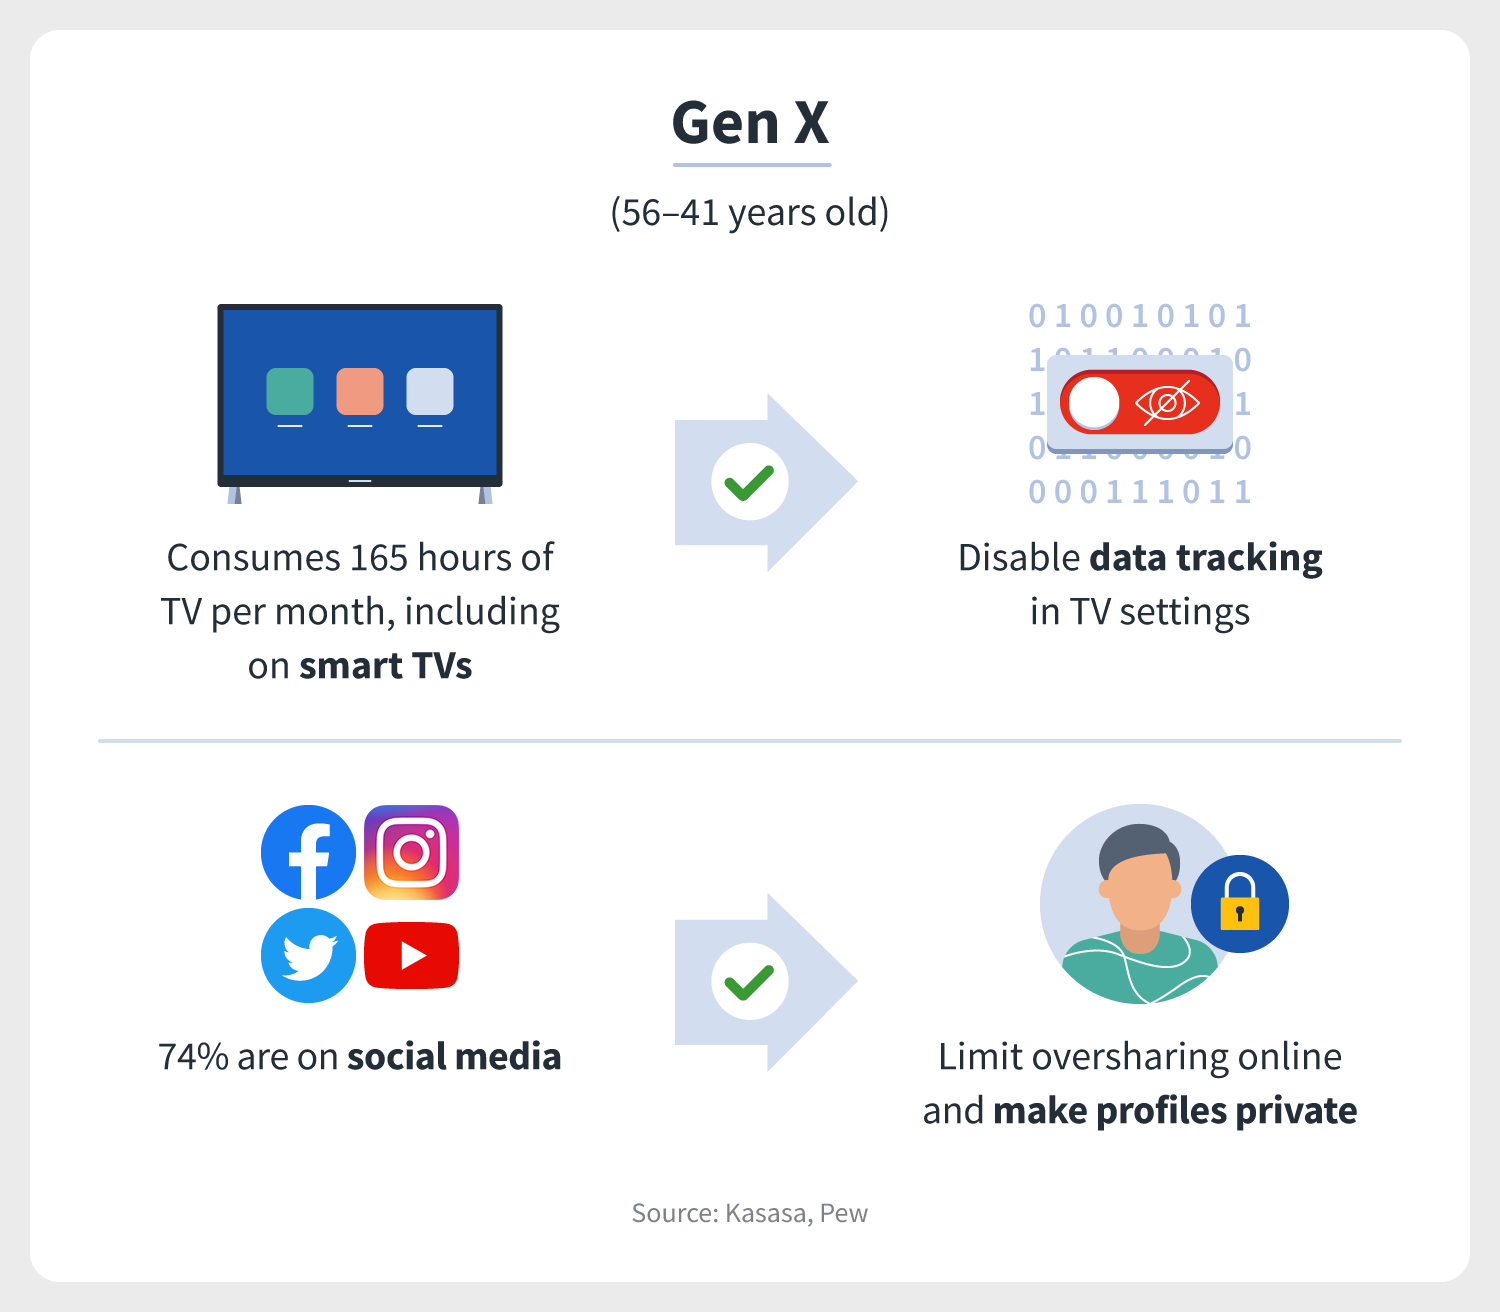 a smart TV and social media icons indicate that the digital generation Gen X prefer these types of technology most and that they should level up their cybersecurity when using them